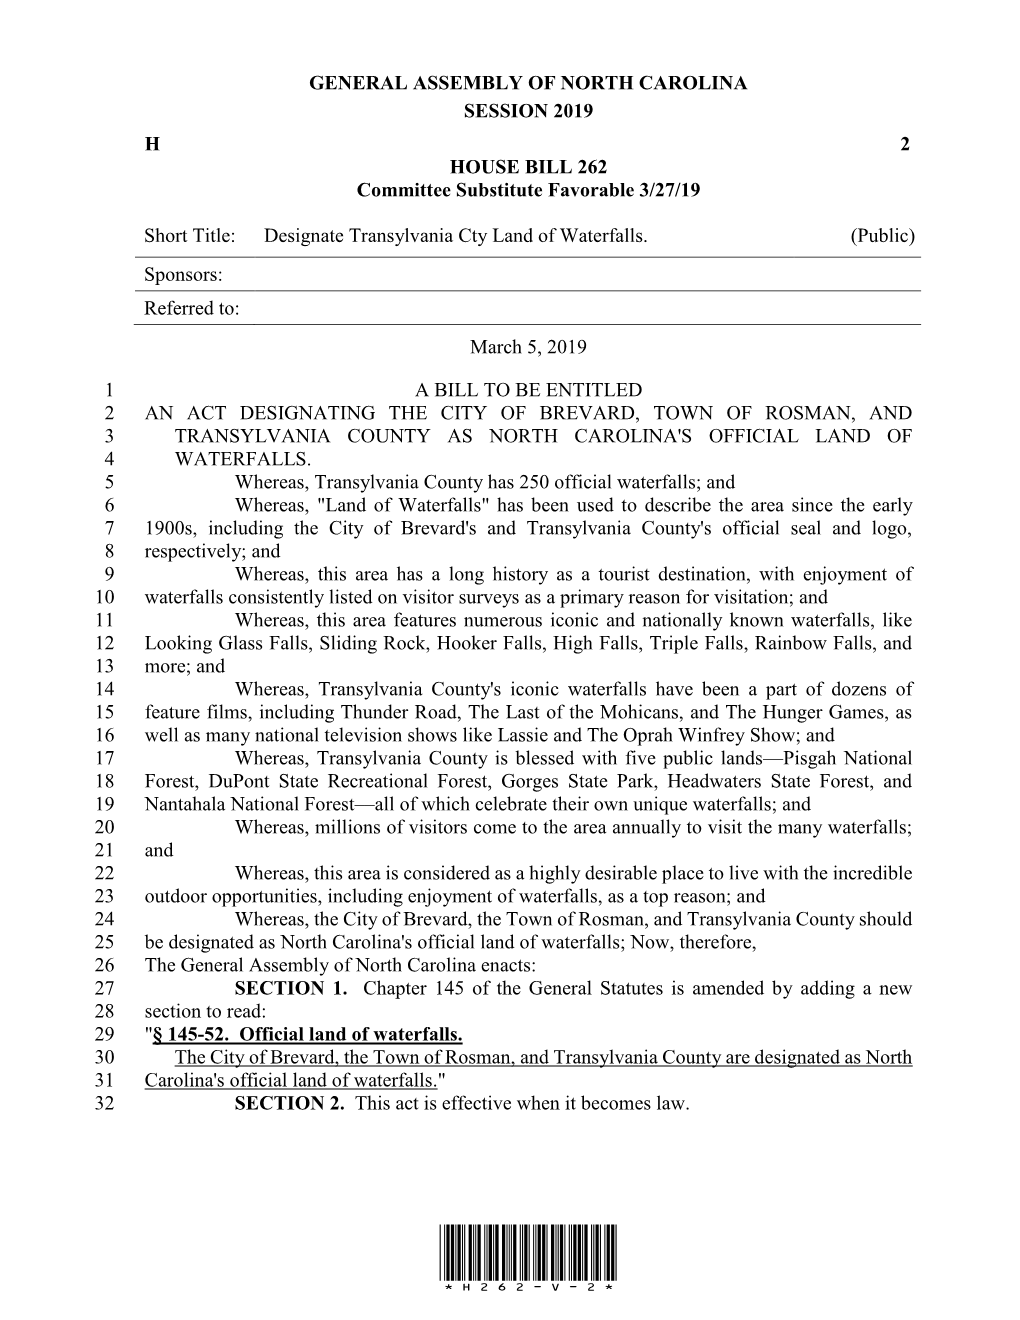 GENERAL ASSEMBLY of NORTH CAROLINA SESSION 2019 H 2 HOUSE BILL 262 Committee Substitute Favorable 3/27/19